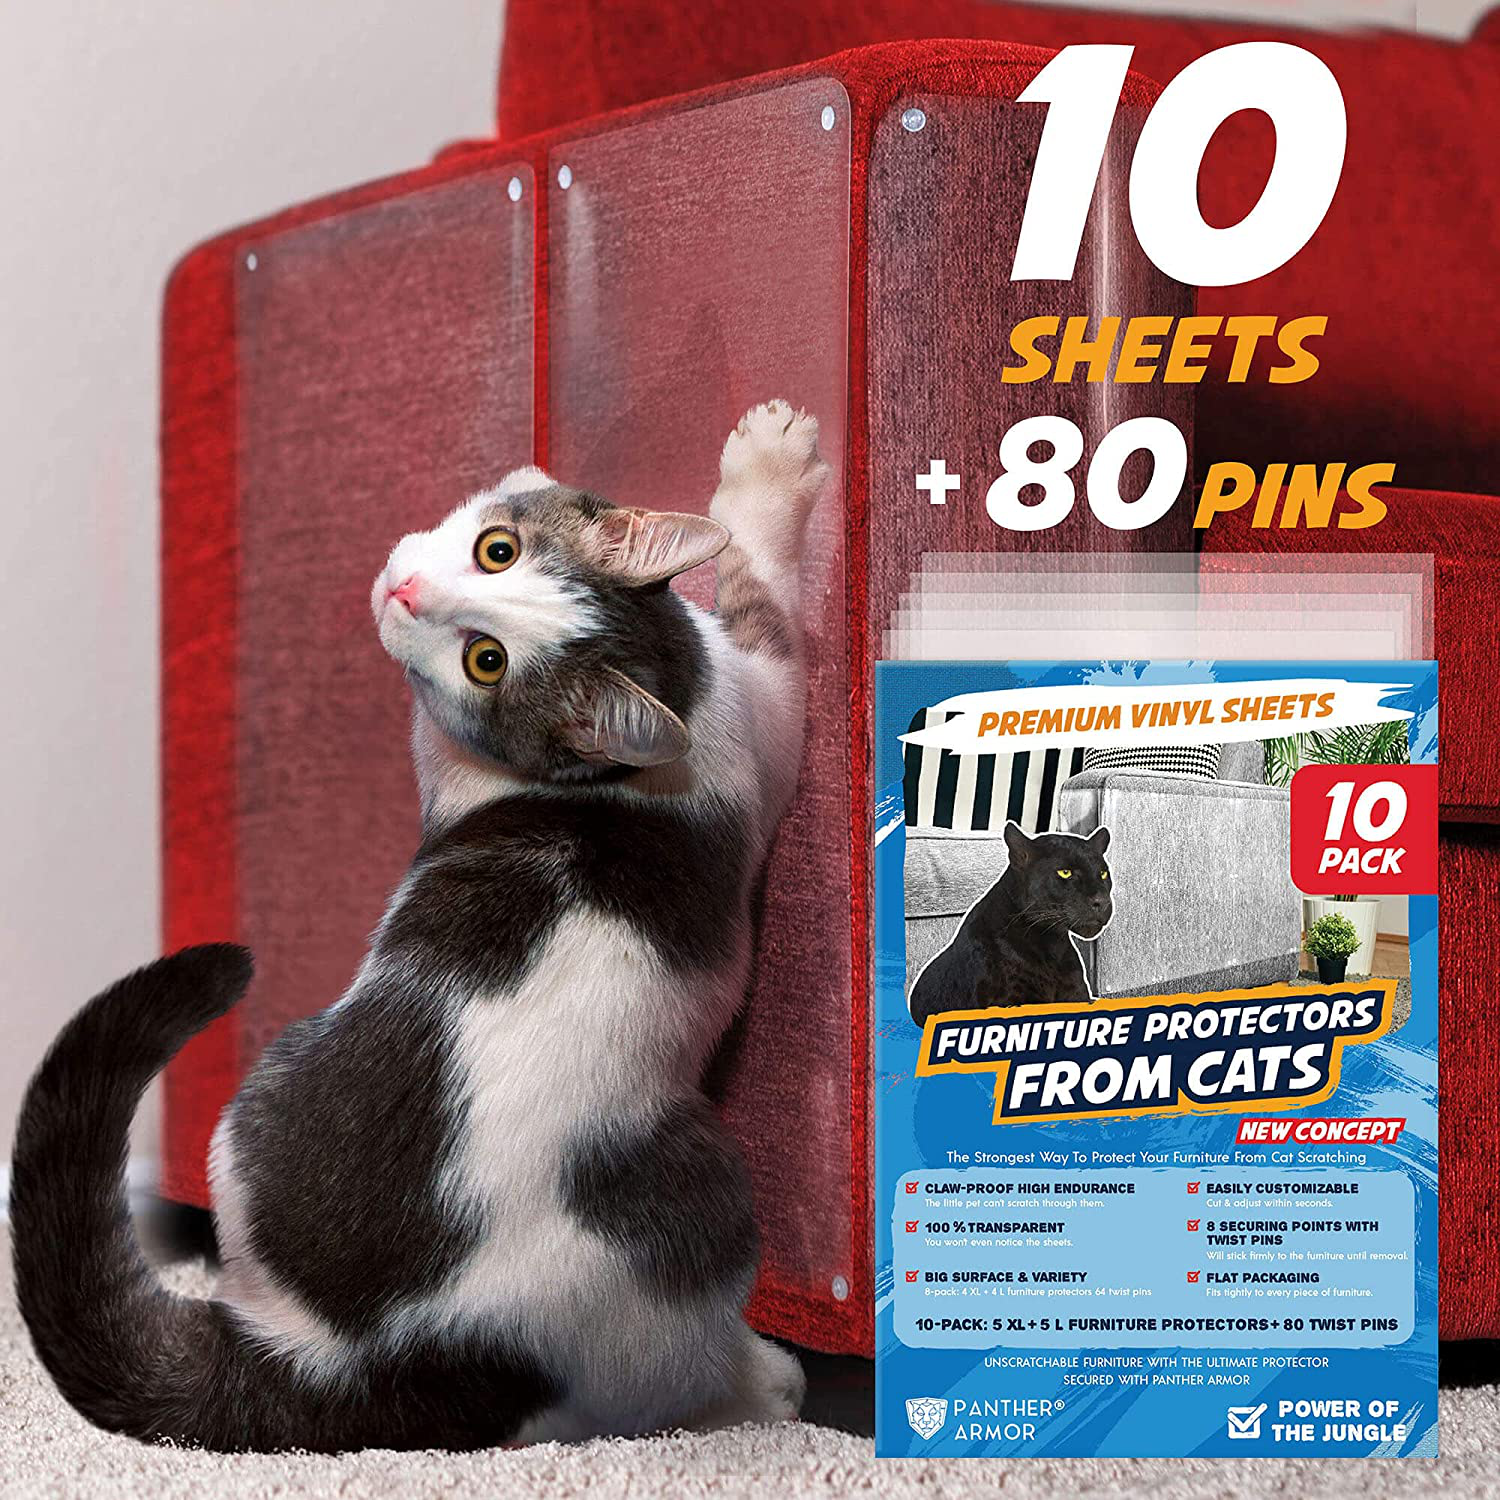 Panther Armor 10(Ten)-Pack XXL Furniture Protectors from Cats Scratch - Couch Protector for Cats - Cat Scratch Deterrent – Sofa Cat Furniture Protector Guards - Cat Furniture Protector Couch Protector